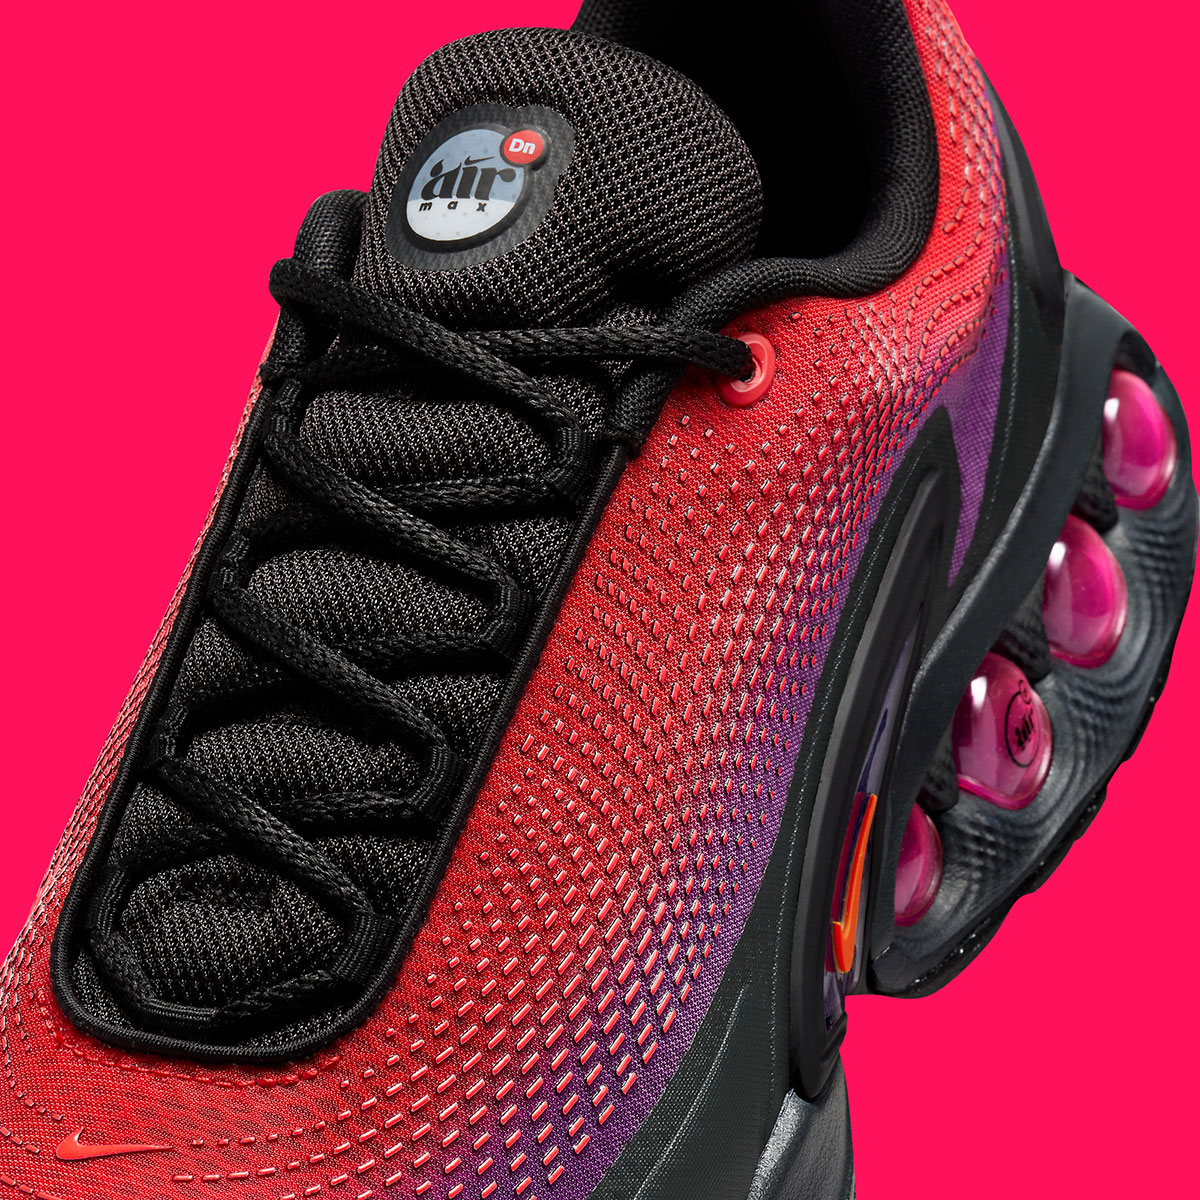 Nike nike air max 95 premium miami vice city girl All Day Release Date 6